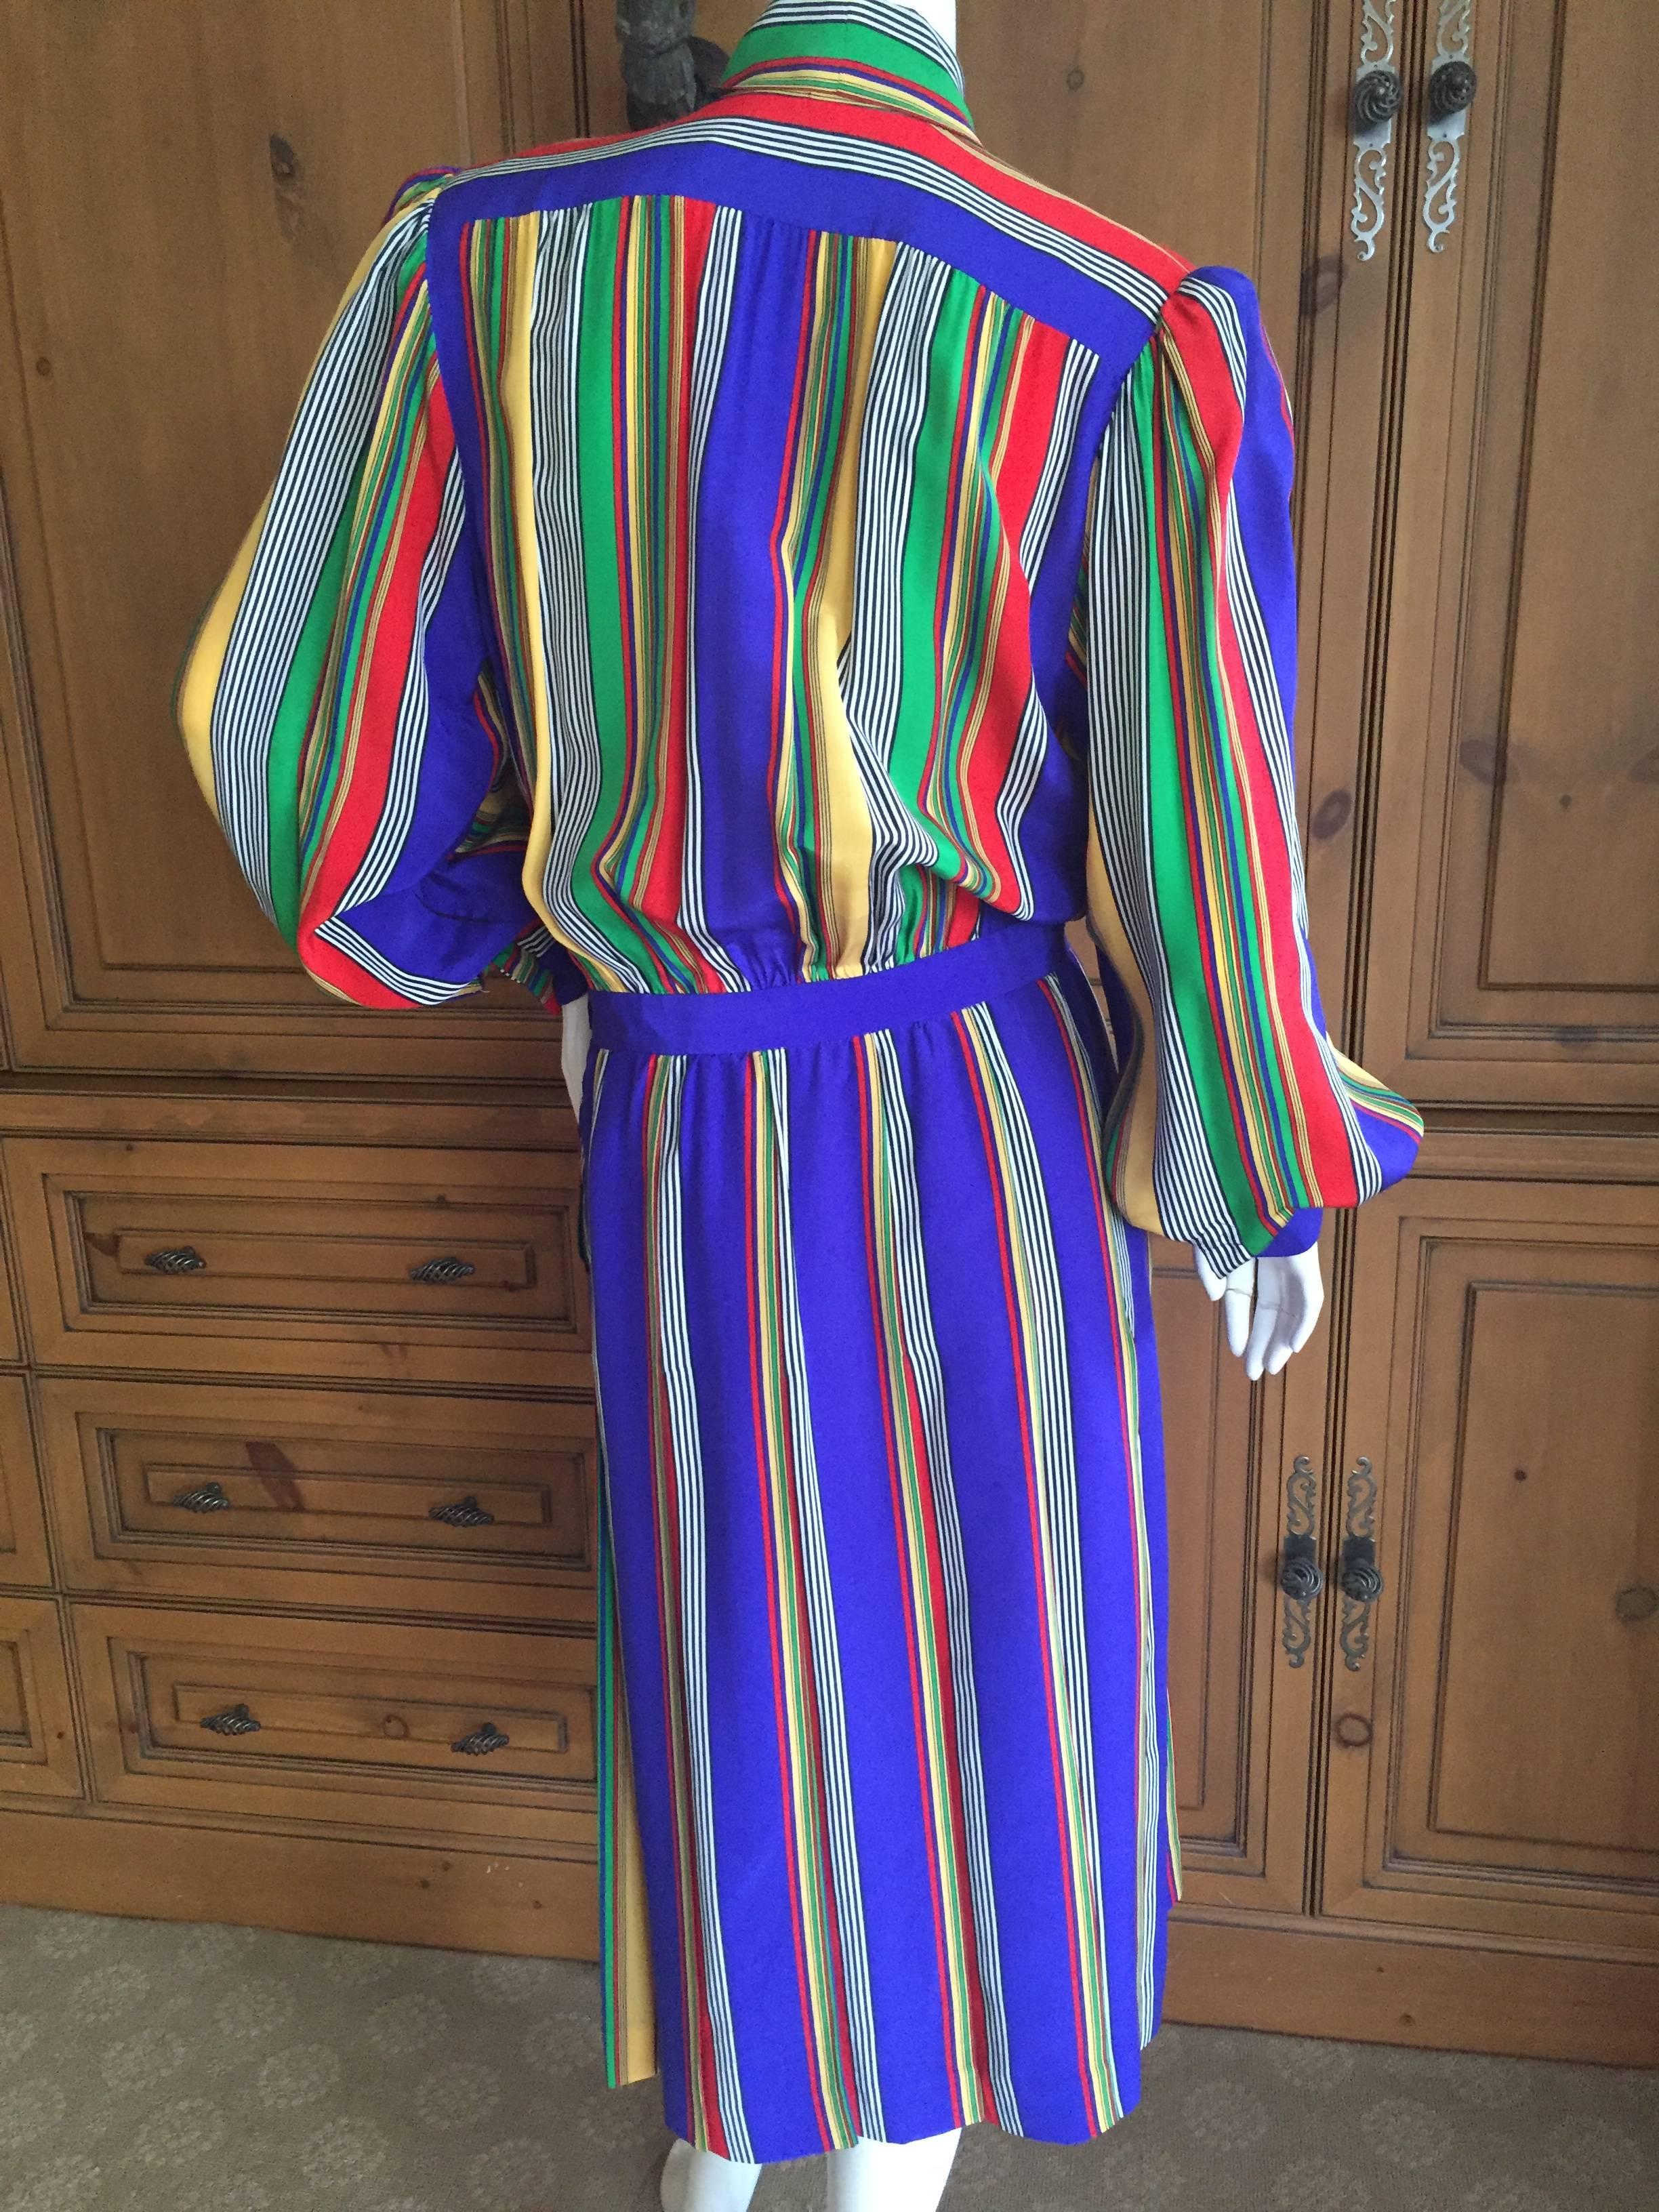 Yves Saint Laurent Rive Gauche 1970's Stripe Silk Day Dress with Bow For Sale 3